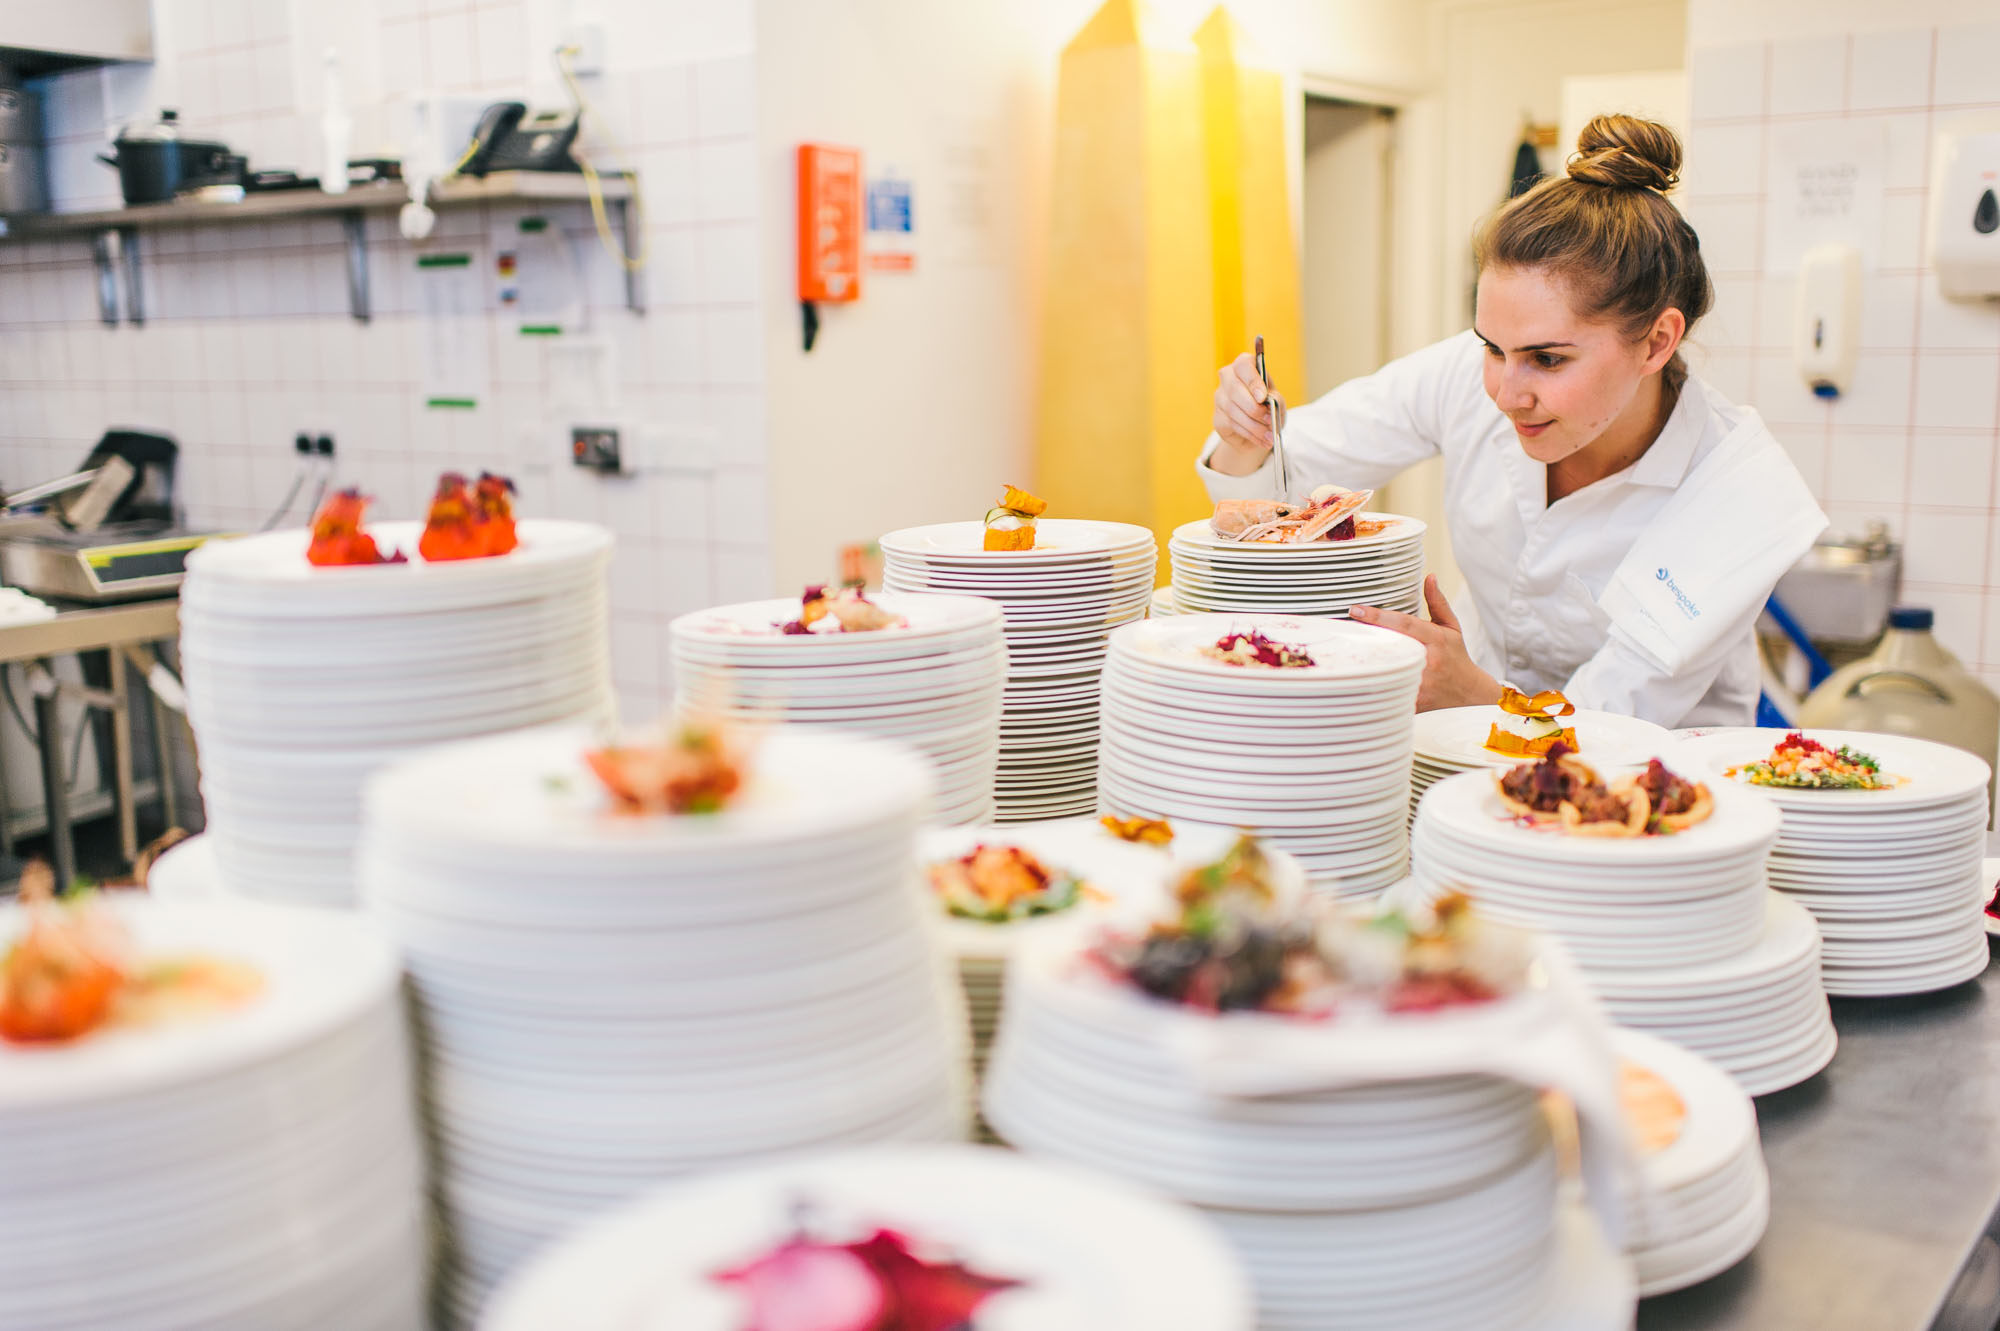 A chef plates one of many courses for The 200 Club by Bompas & Parr. In 2015, the experimental food artists staged what is to date the world’s lengthiest tasting menu, with a pop-up restaurant that served 200 courses over 24 hours. Photo: Bompas & Parr